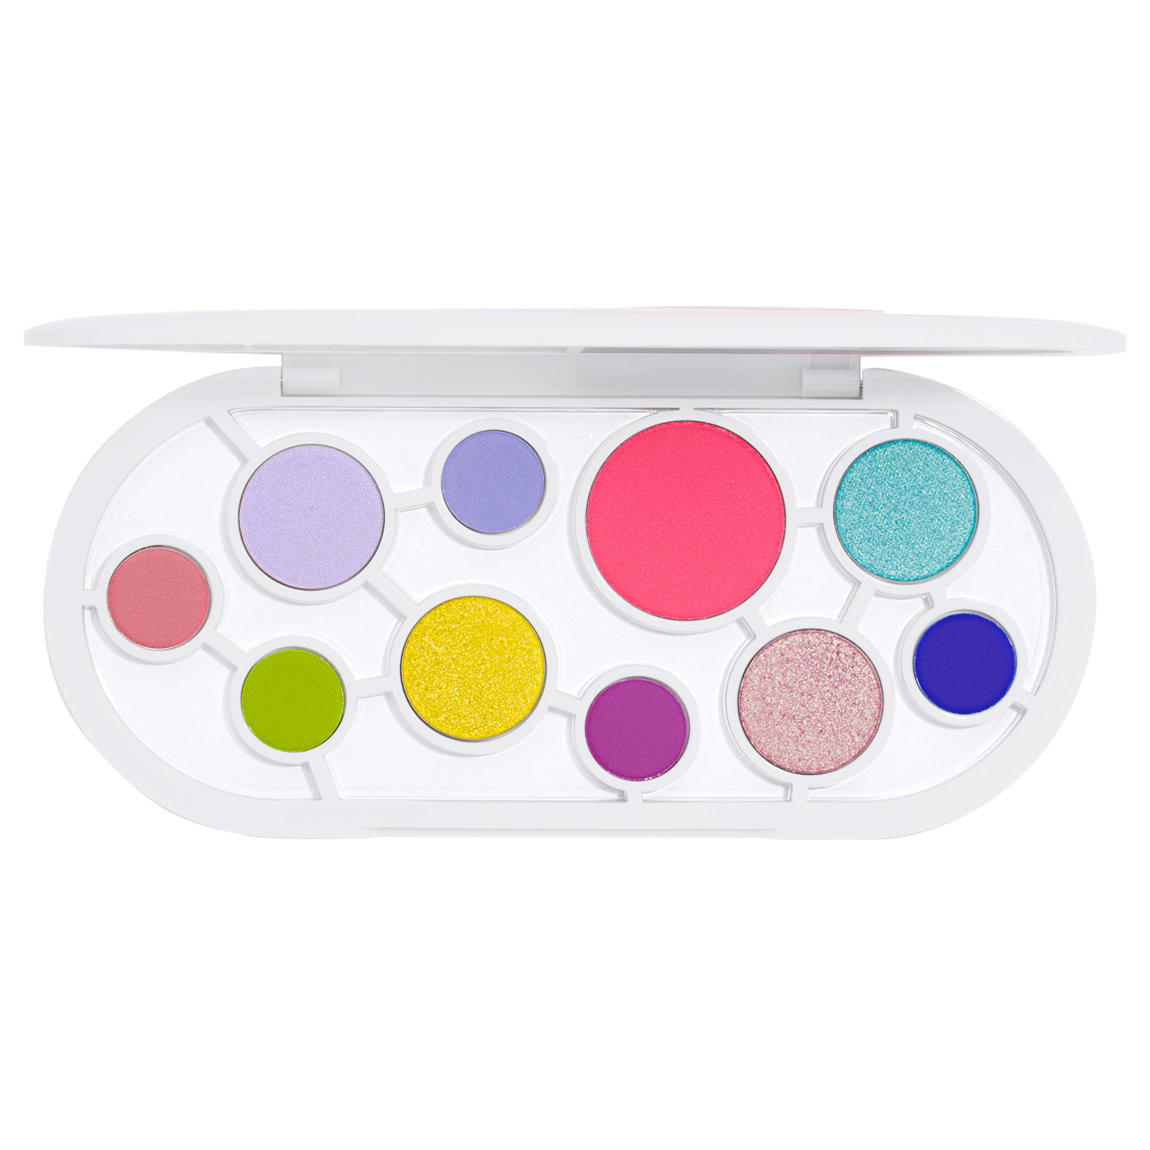 Sugarpill Capsule Collection Palette Pink Edition